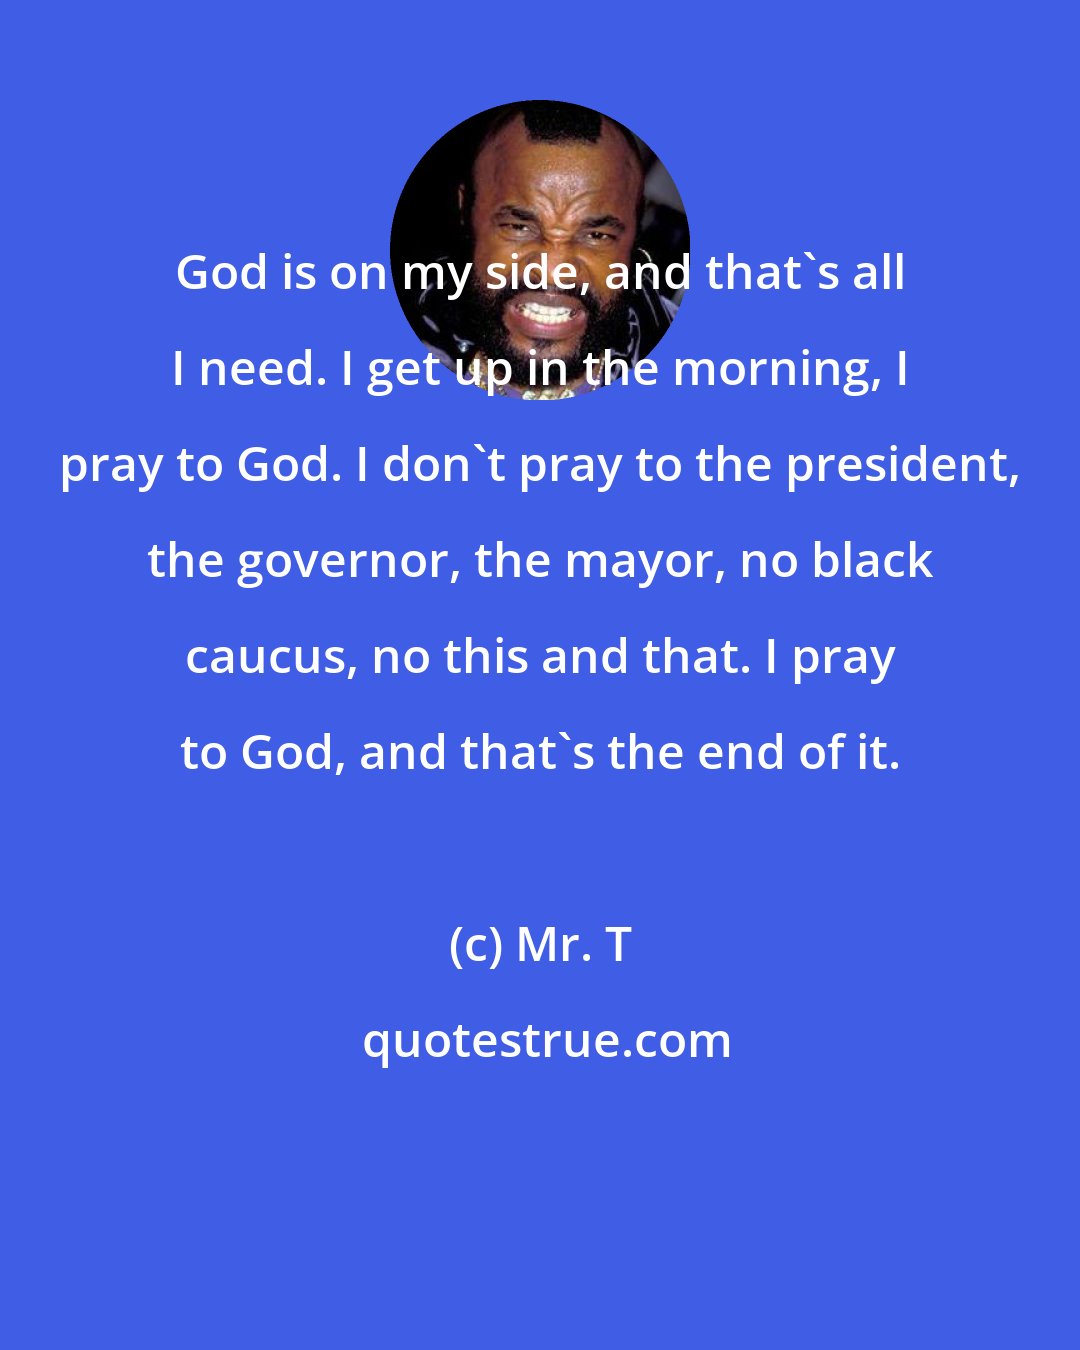 Mr. T: God is on my side, and that's all I need. I get up in the morning, I pray to God. I don't pray to the president, the governor, the mayor, no black caucus, no this and that. I pray to God, and that's the end of it.